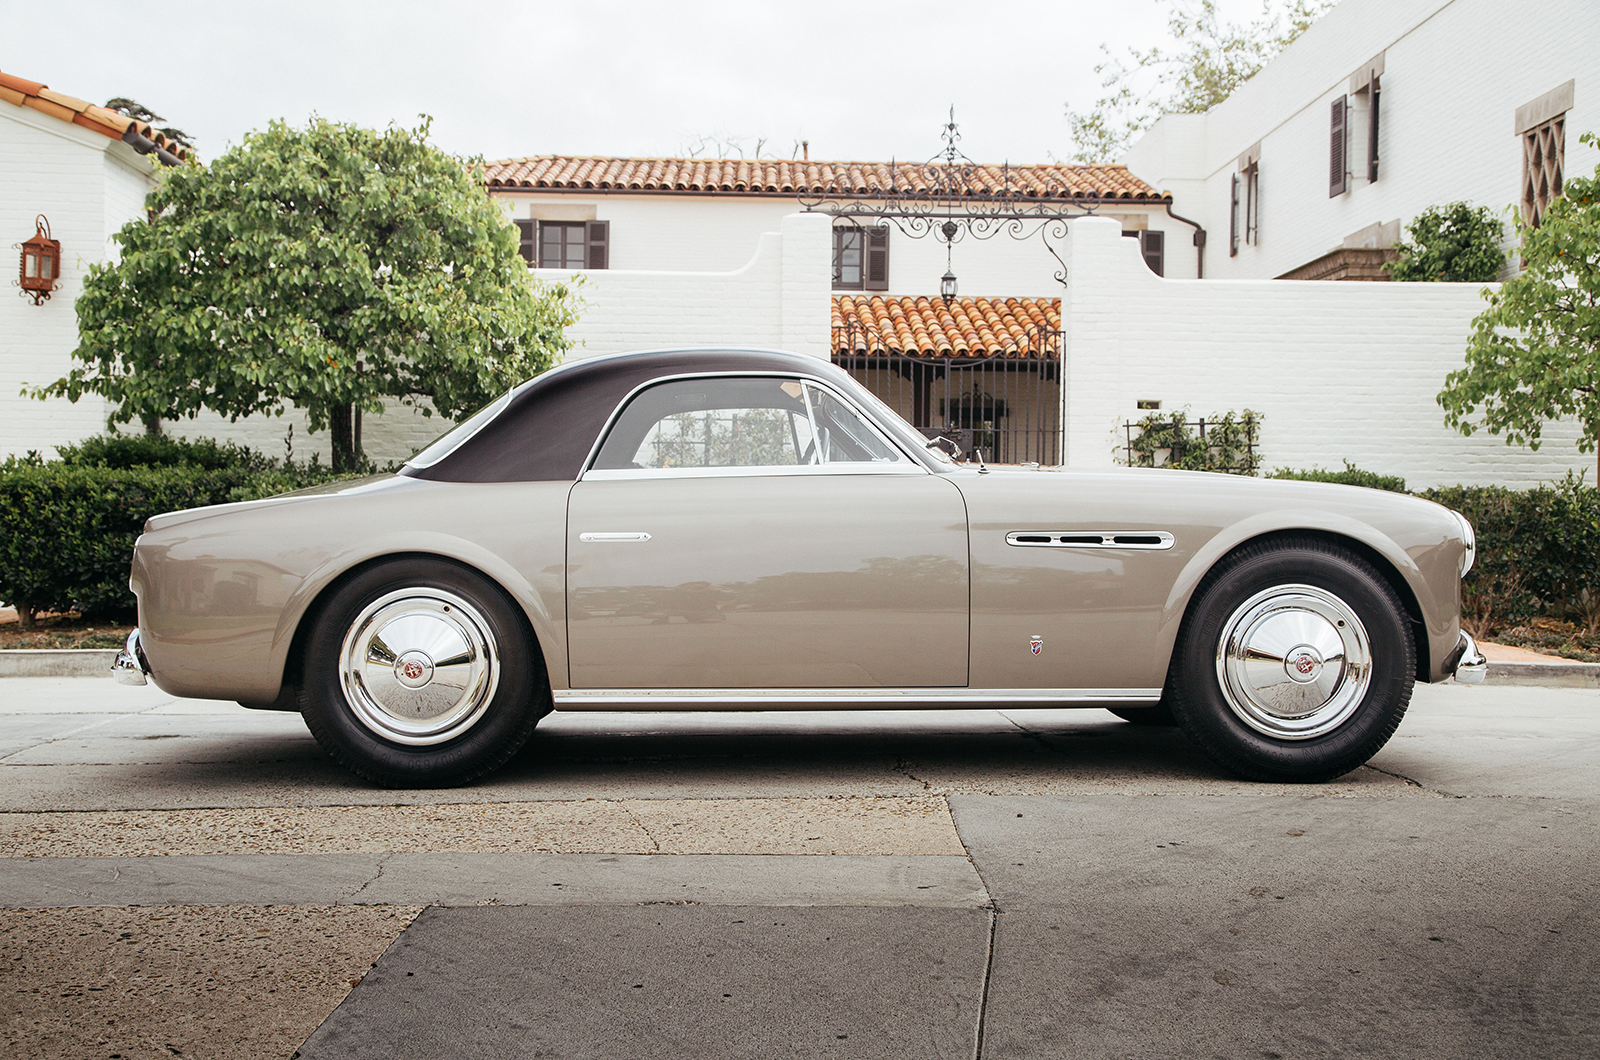 Classic & Sports Car – Unique Alfa duo joins Concours of Elegance line-up